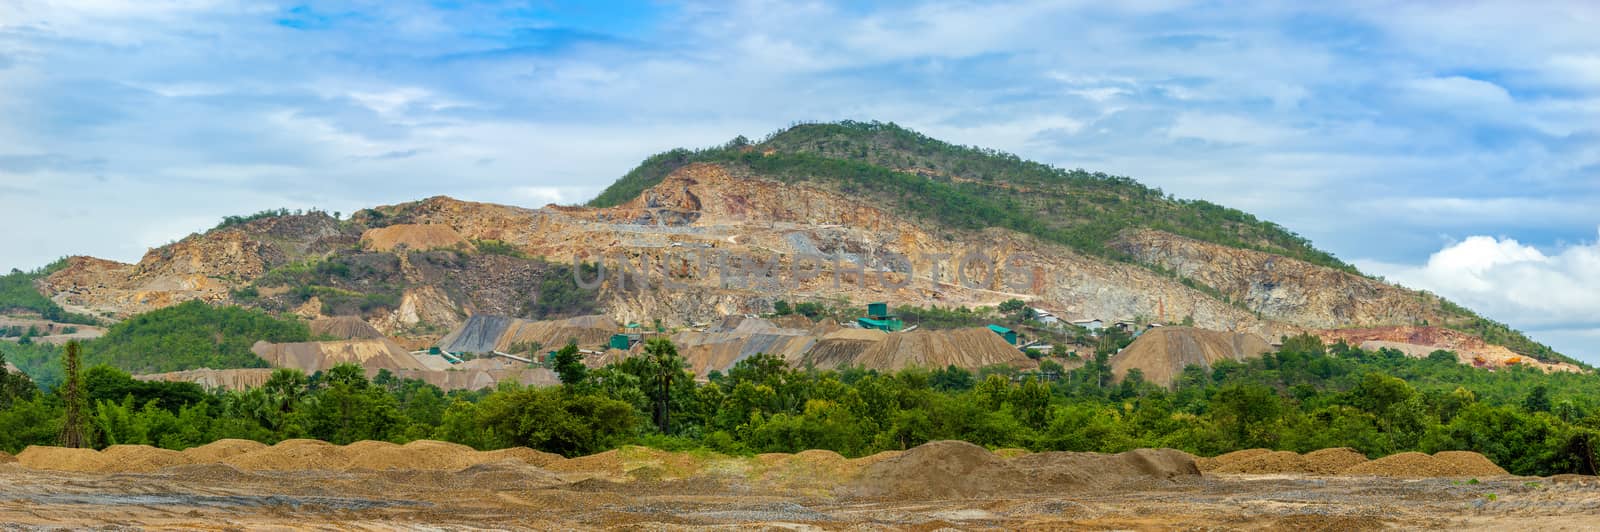 Panoramic of limestone quarry or mining industry on the mountain by SaitanSainam